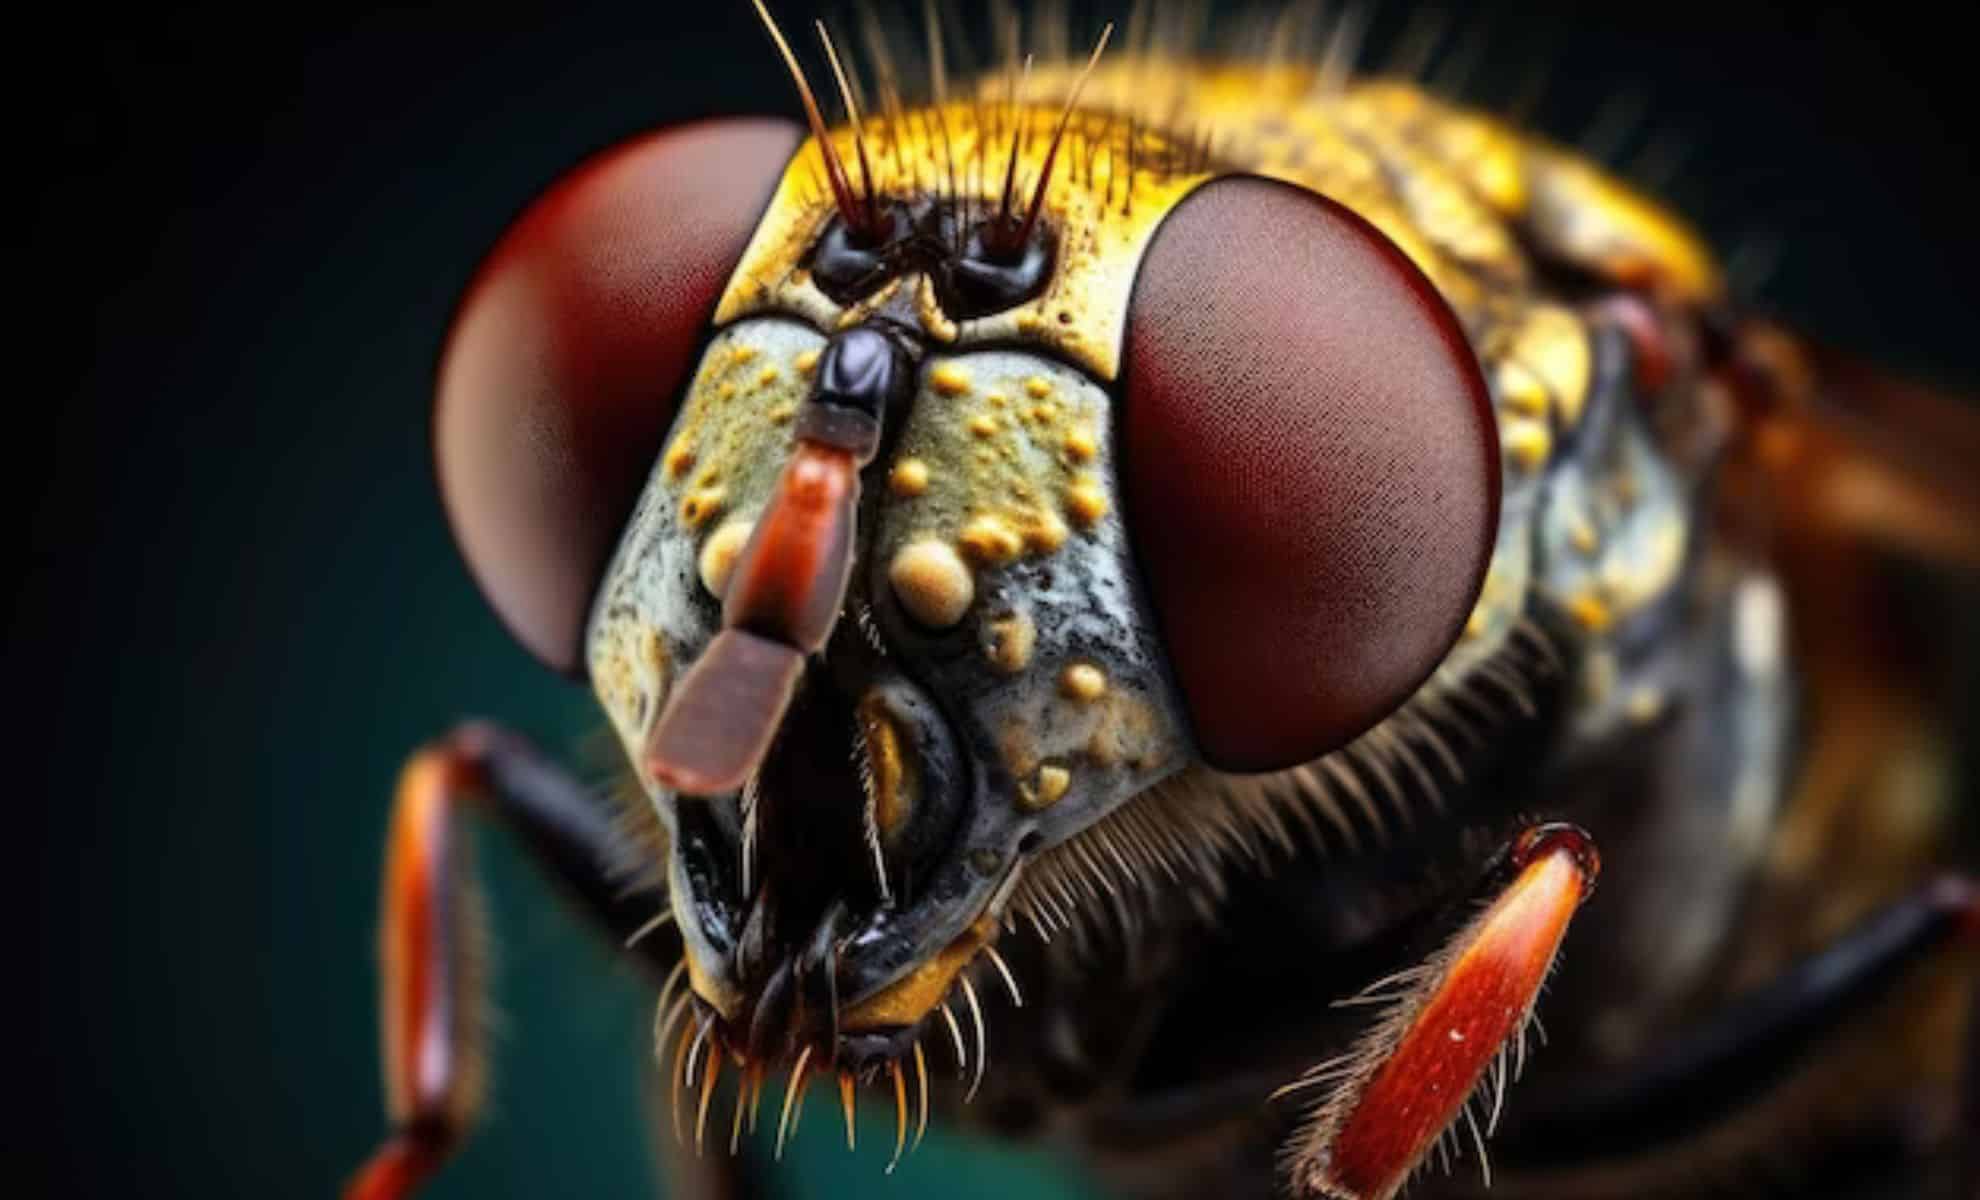 What you need to know about the cicada invasion expected in the spring